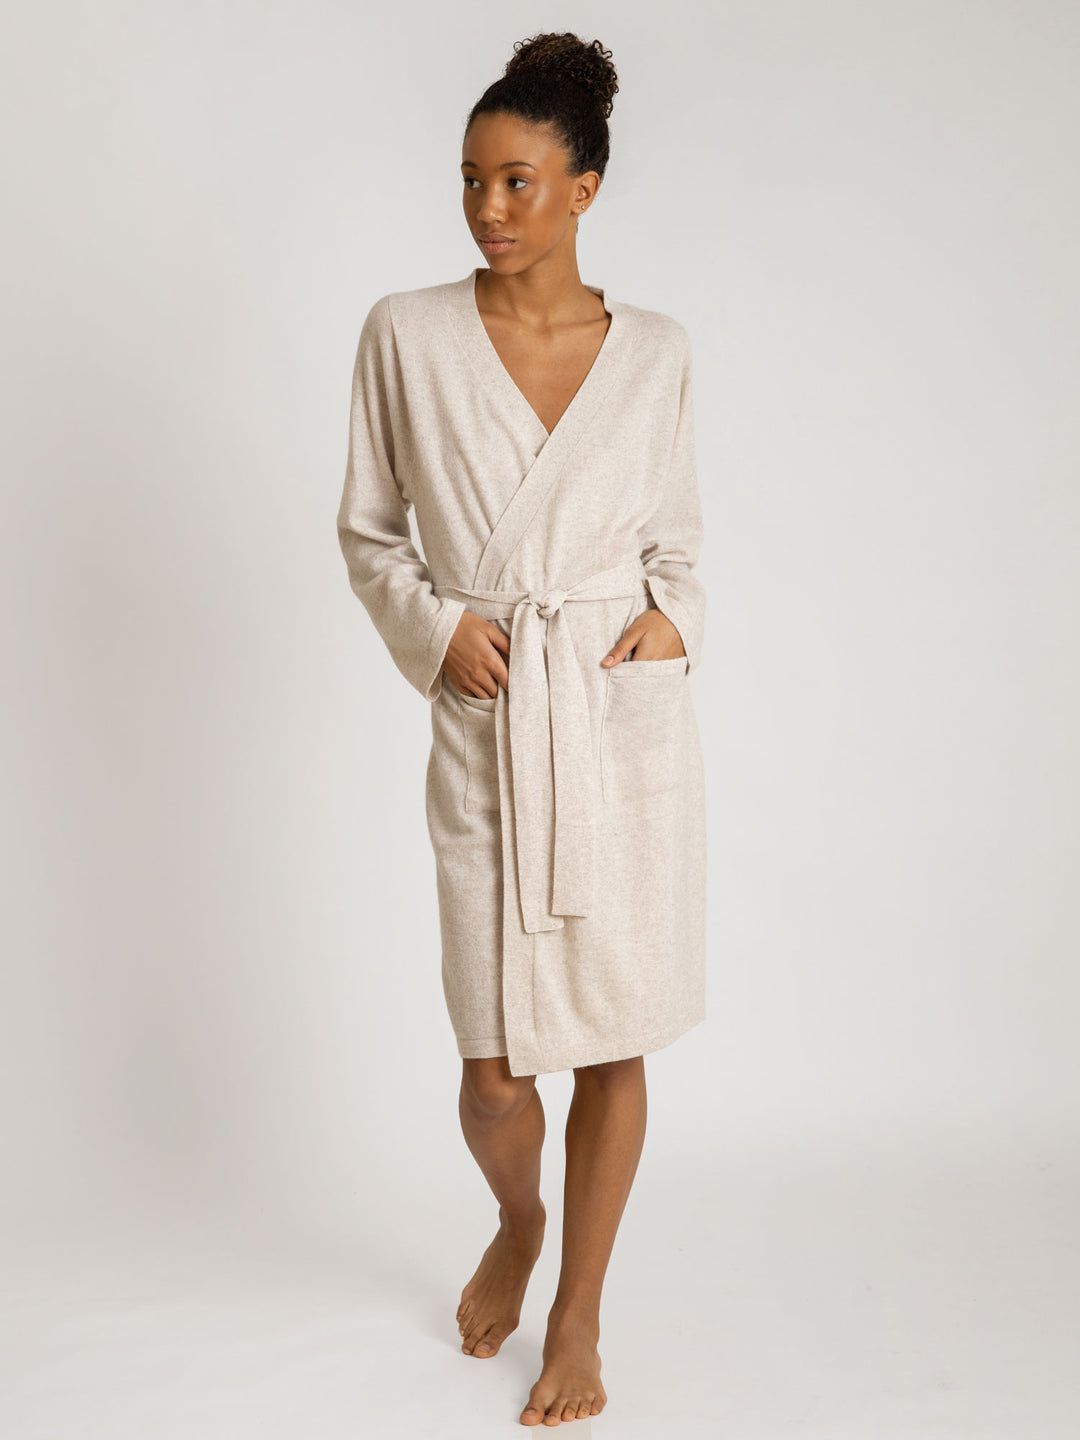 Morning robe Classic in 100% cashmere by Kashmina. Scandinavian design. Color: beige.